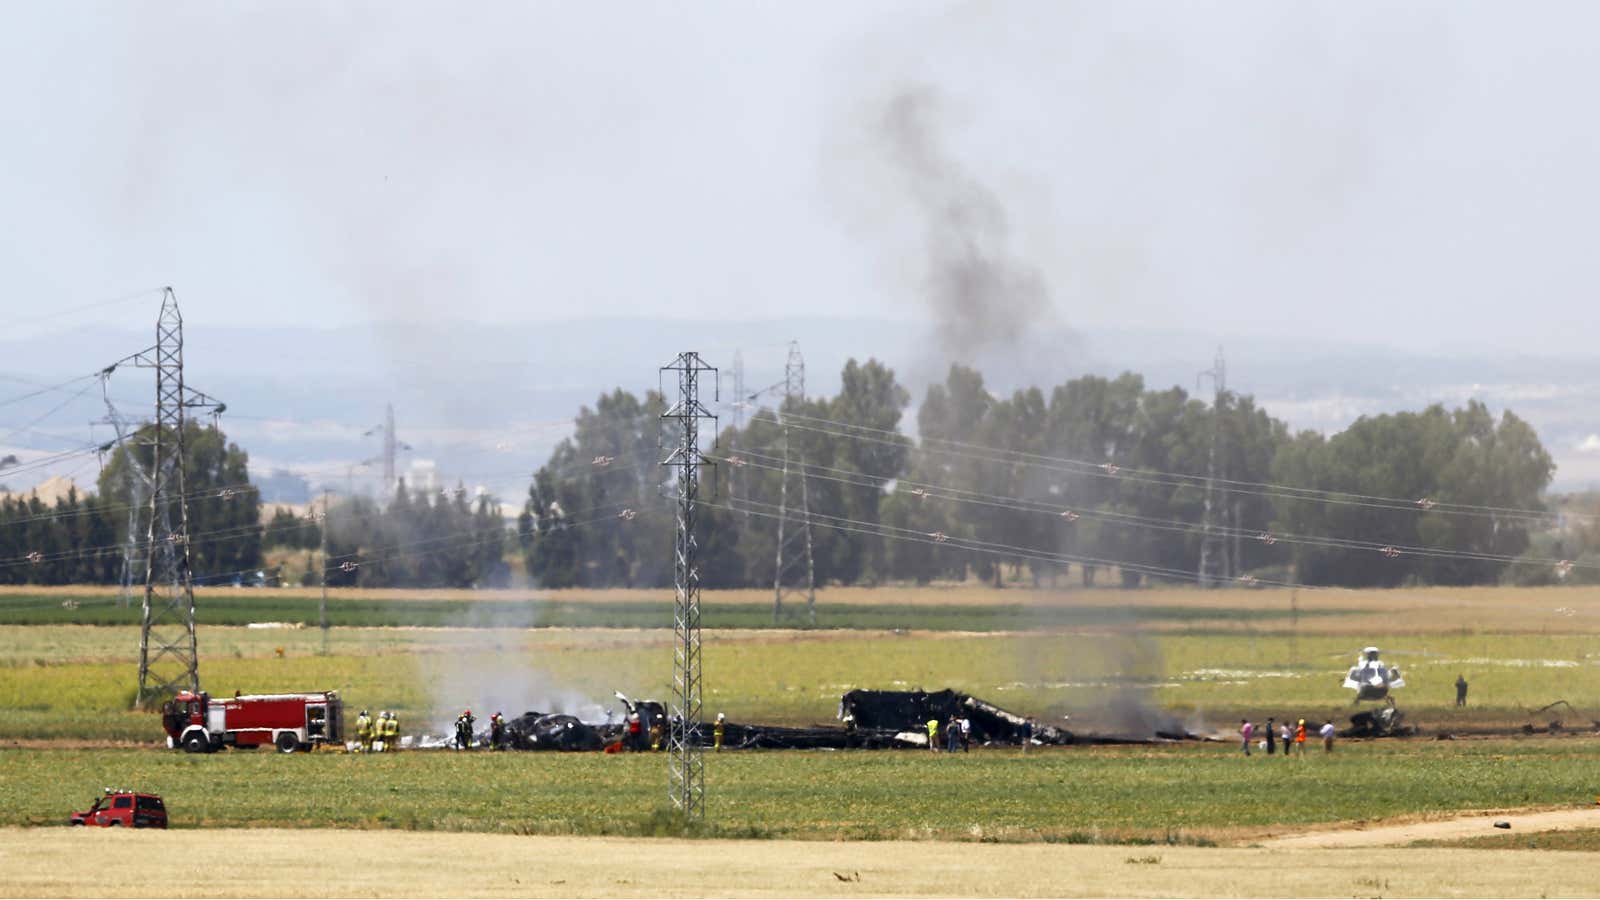 The remains of an Airbus A400M that crashed in a field near Seville on May 9.